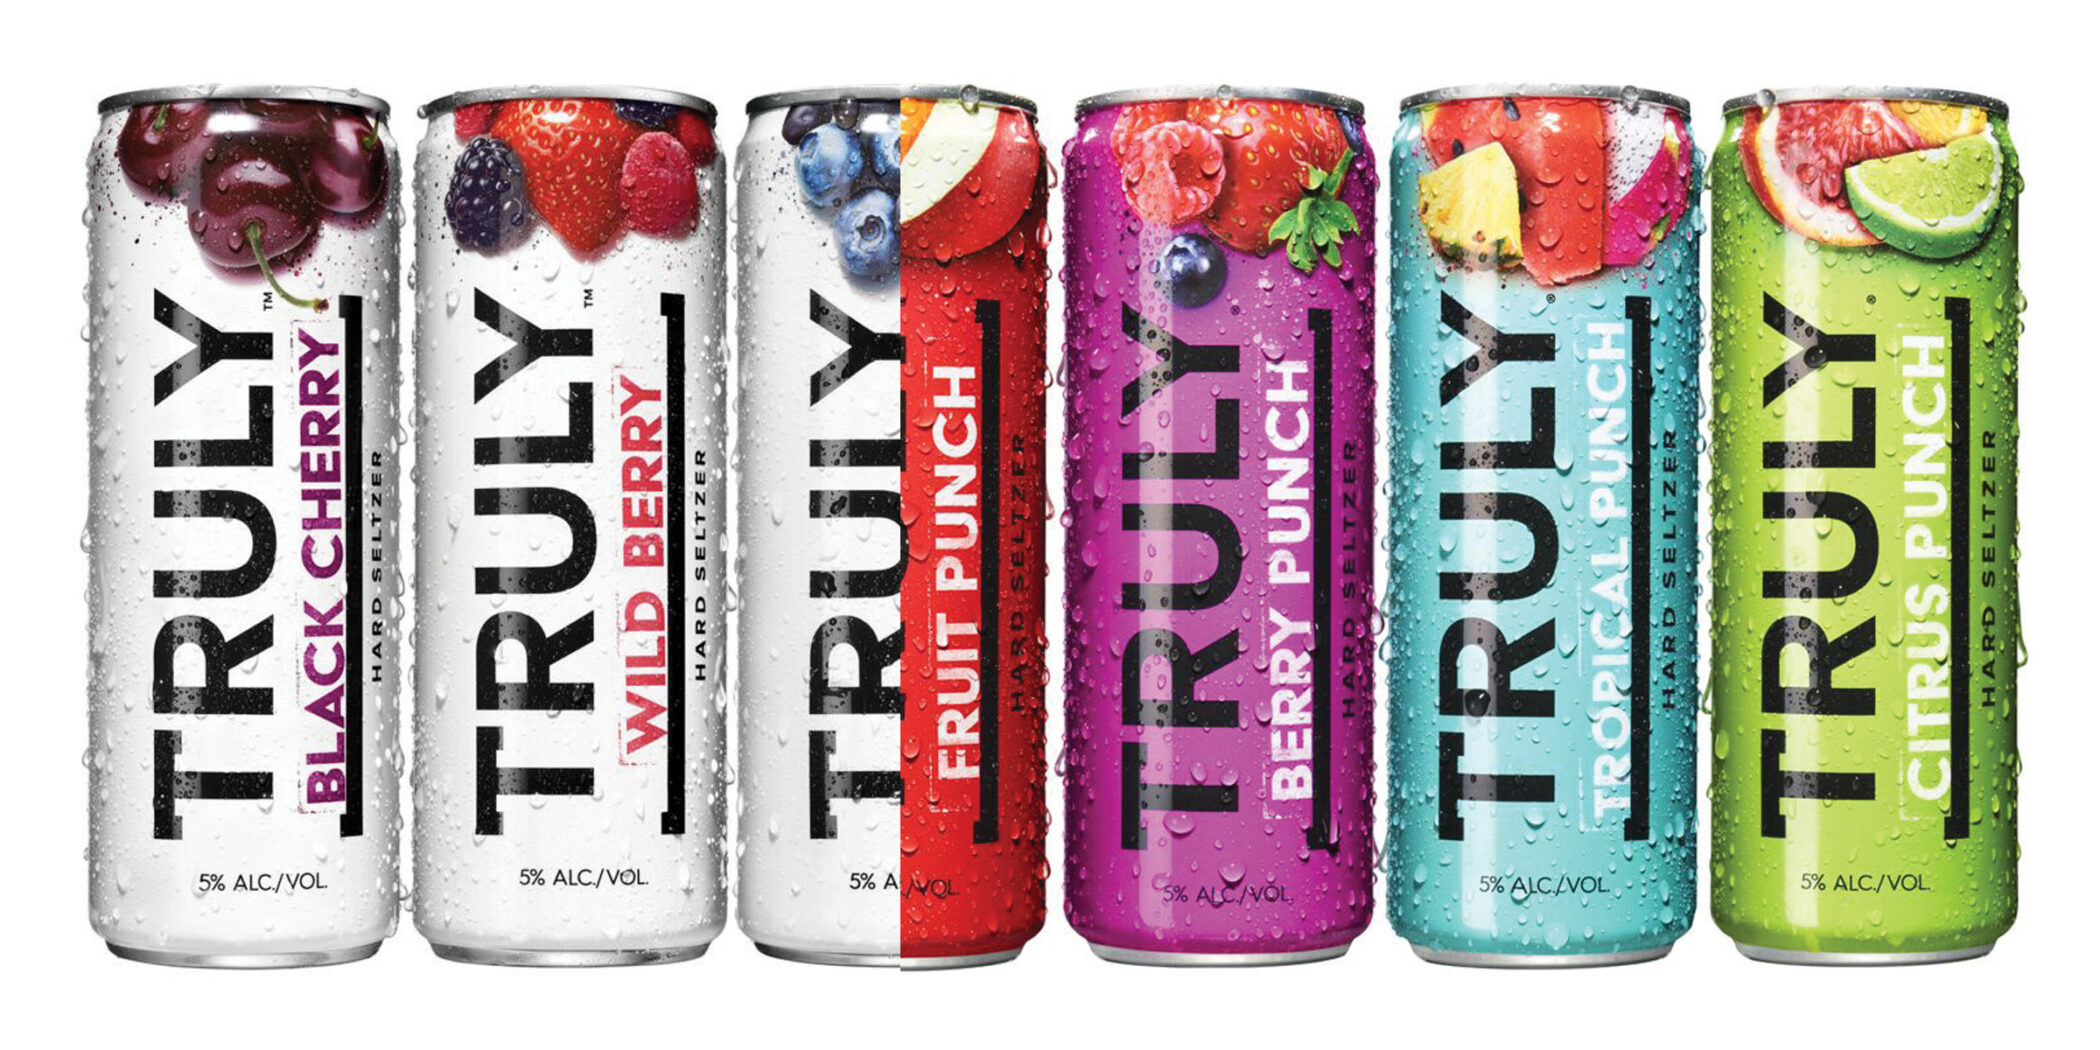 Truly Hard Seltzer > Truly Hard Seltzer Punch” />
				</div>
				<div class=